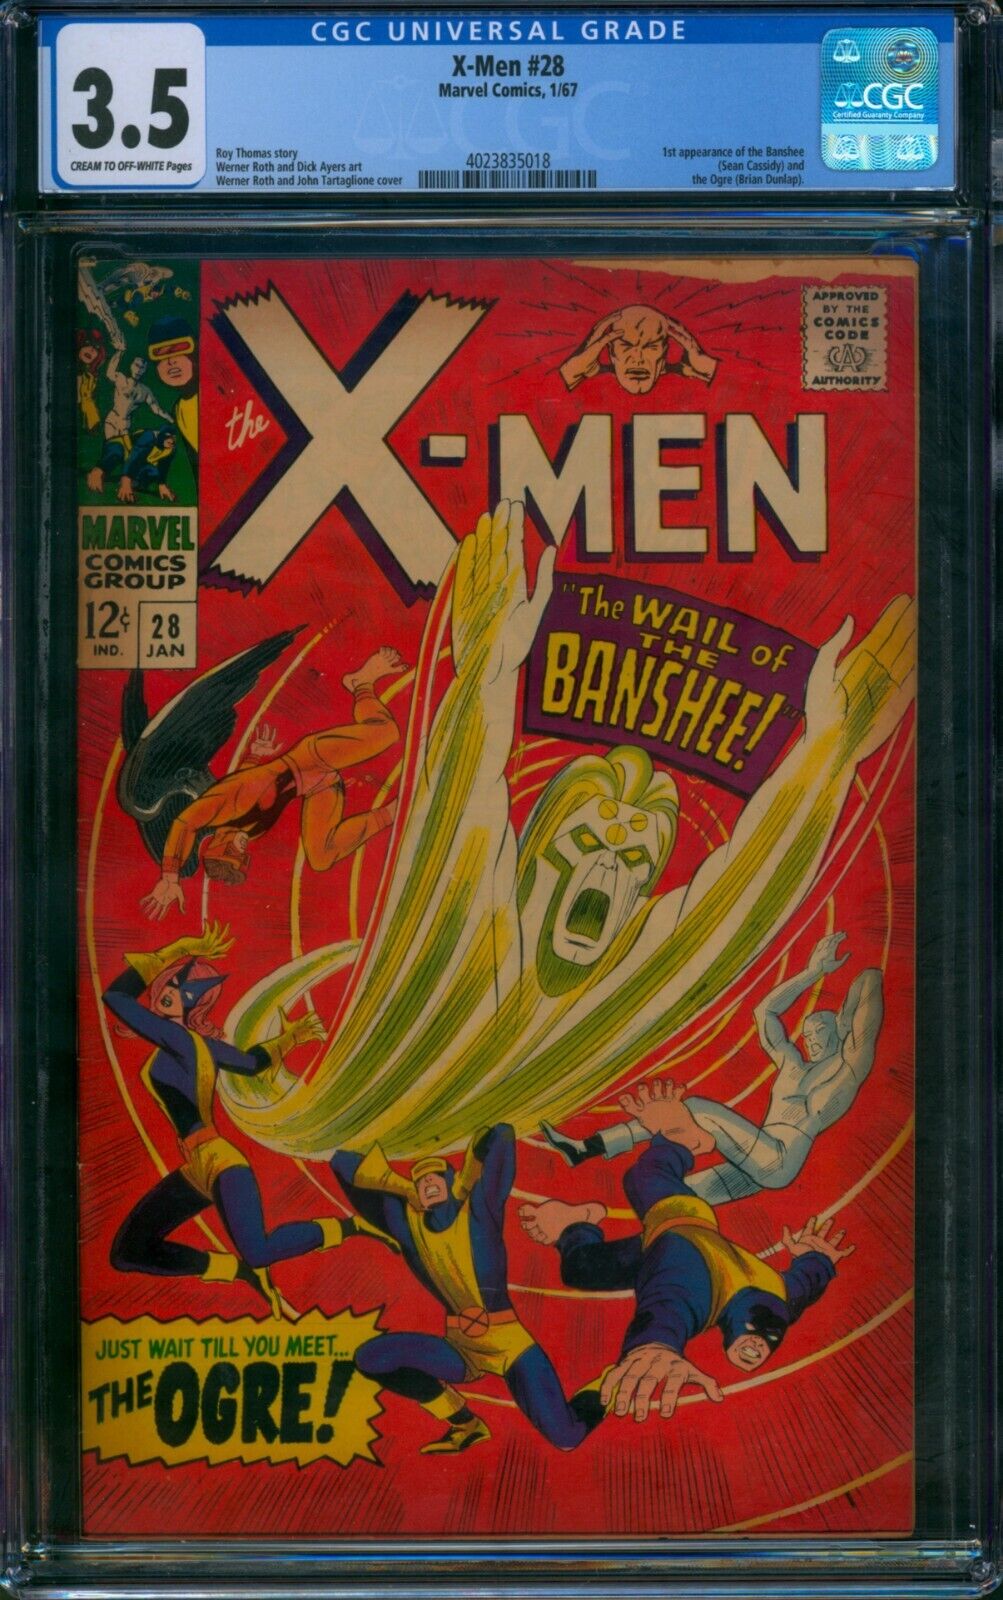 X-Men #28 🌟 CGC 3.5 🌟 1st Appearance of BANSHEE Silver Age Marvel Comic 1967